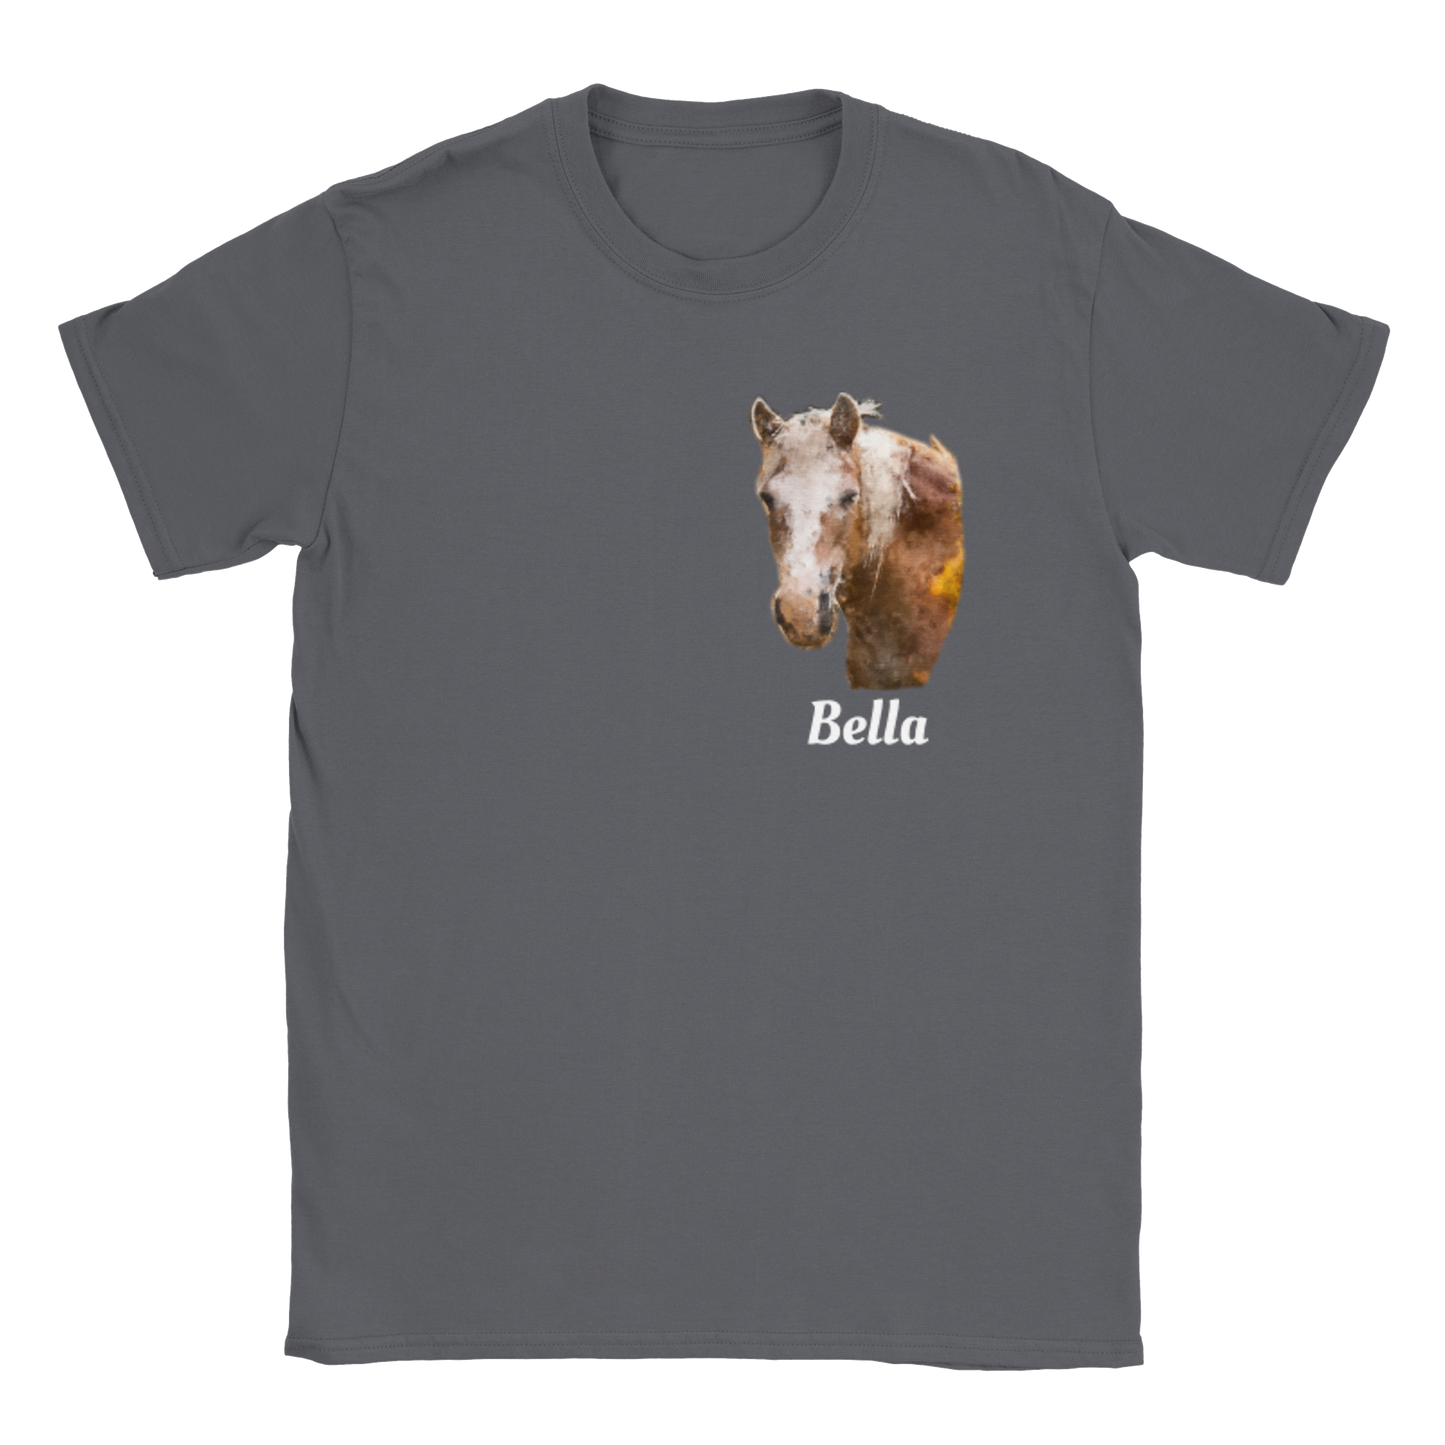 Hand Drawn Horse || Unisex Crewneck T-shirt - Oil Painting - Personalized; Personalized with your horse